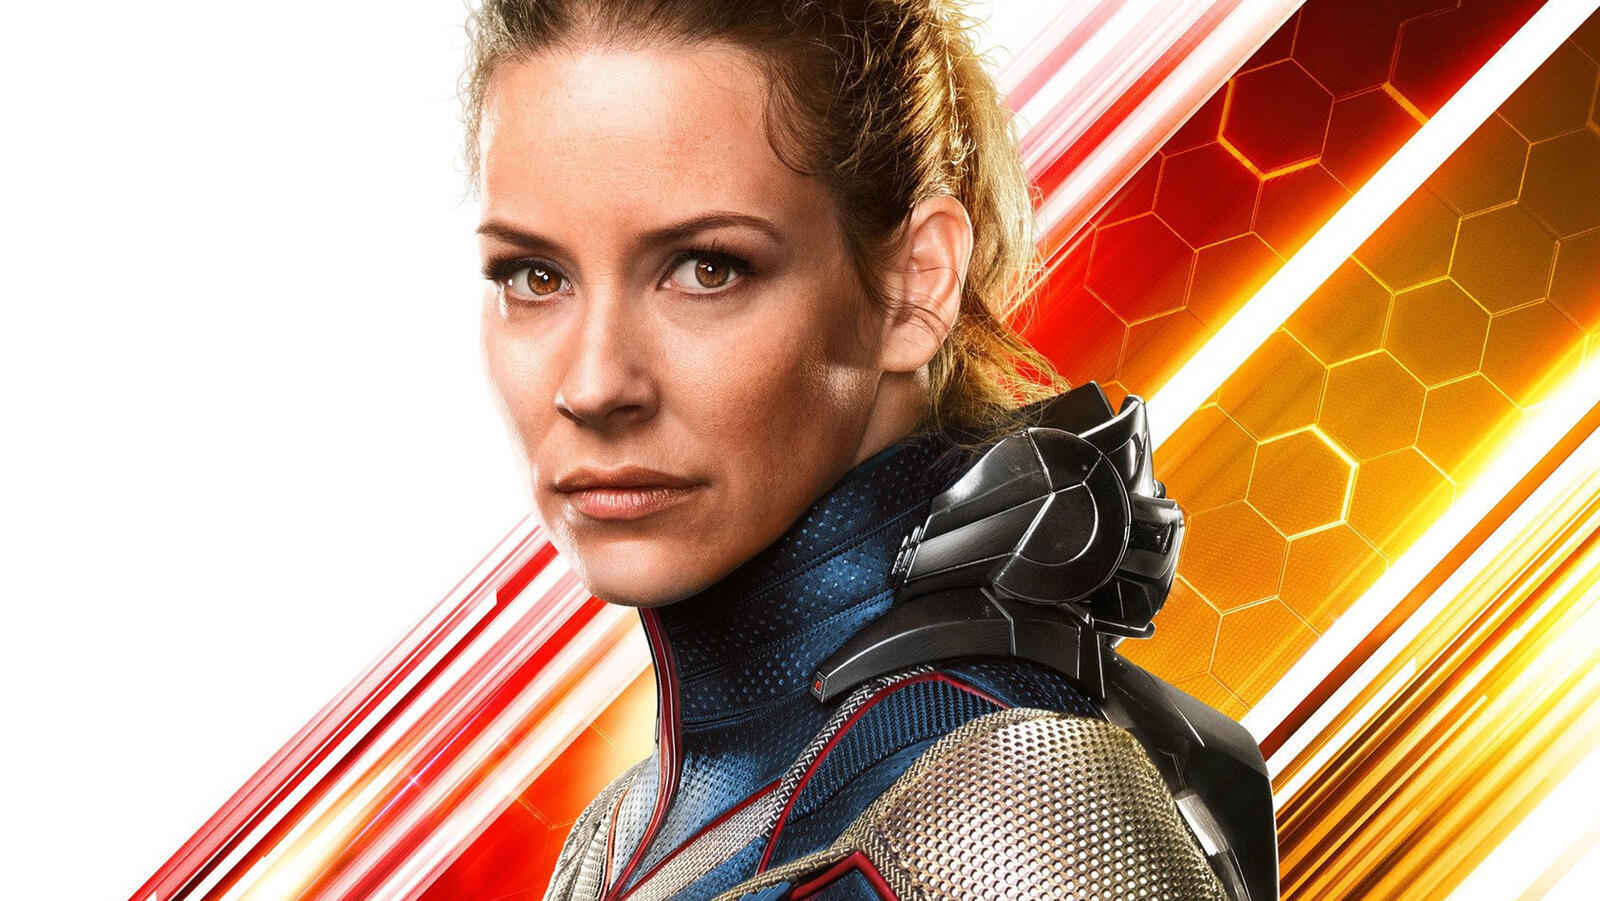 Wallpapers movies poster ant man and the wasp on the desktop